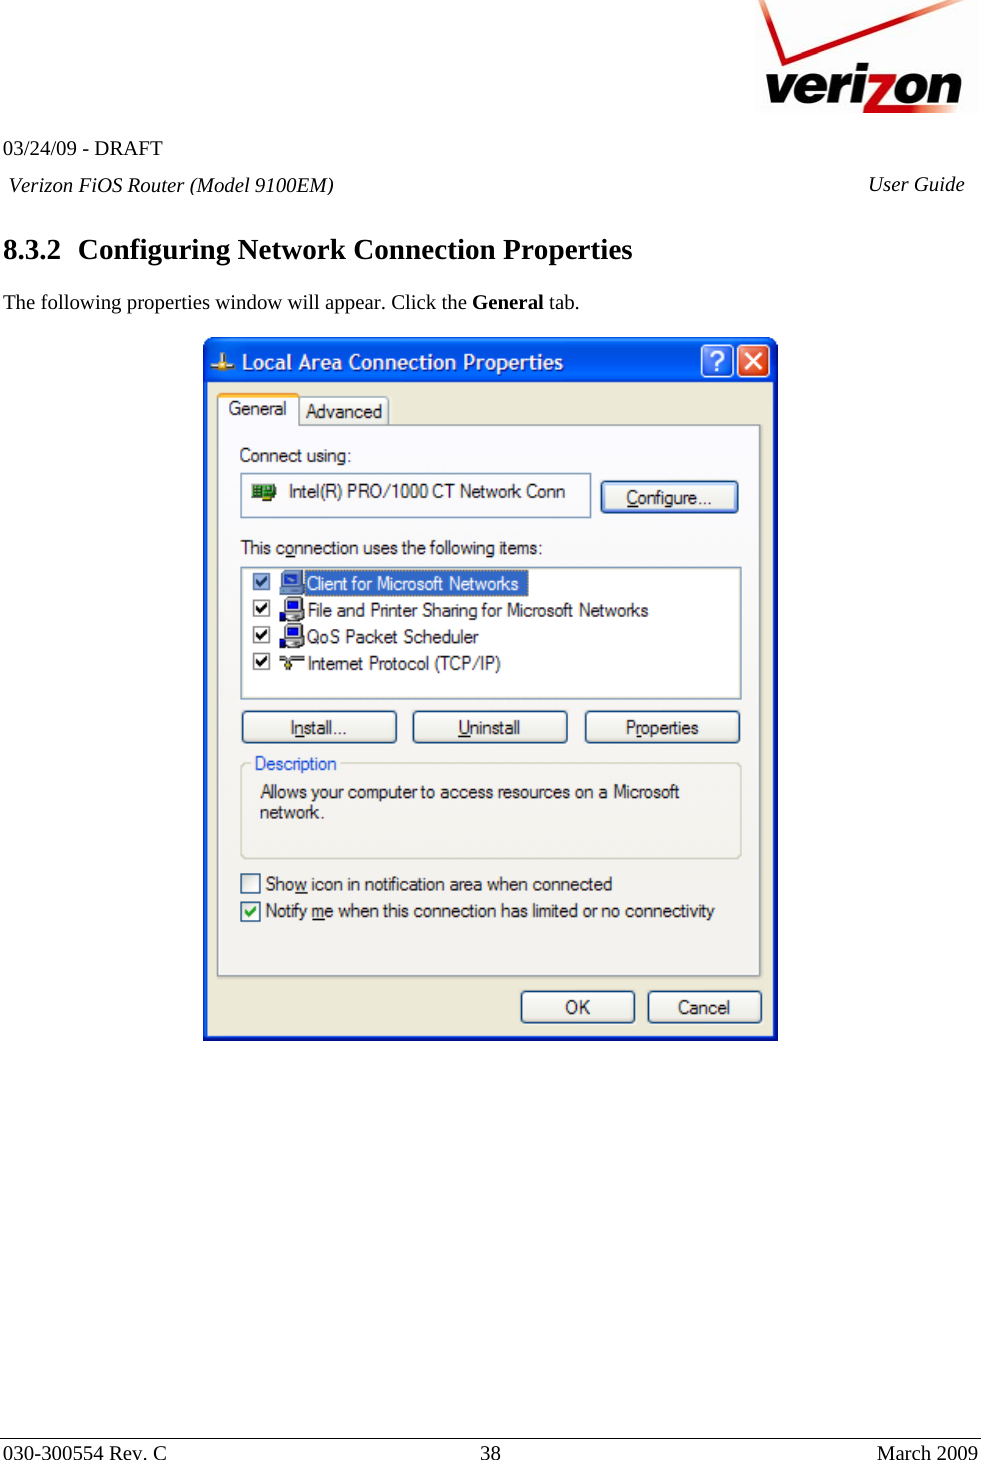   03/24/09 - DRAFT   030-300554 Rev. C  38      March 2009  Verizon FiOS Router (Model 9100EM) User Guide 8.3.2 Configuring Network Connection Properties  The following properties window will appear. Click the General tab.                   